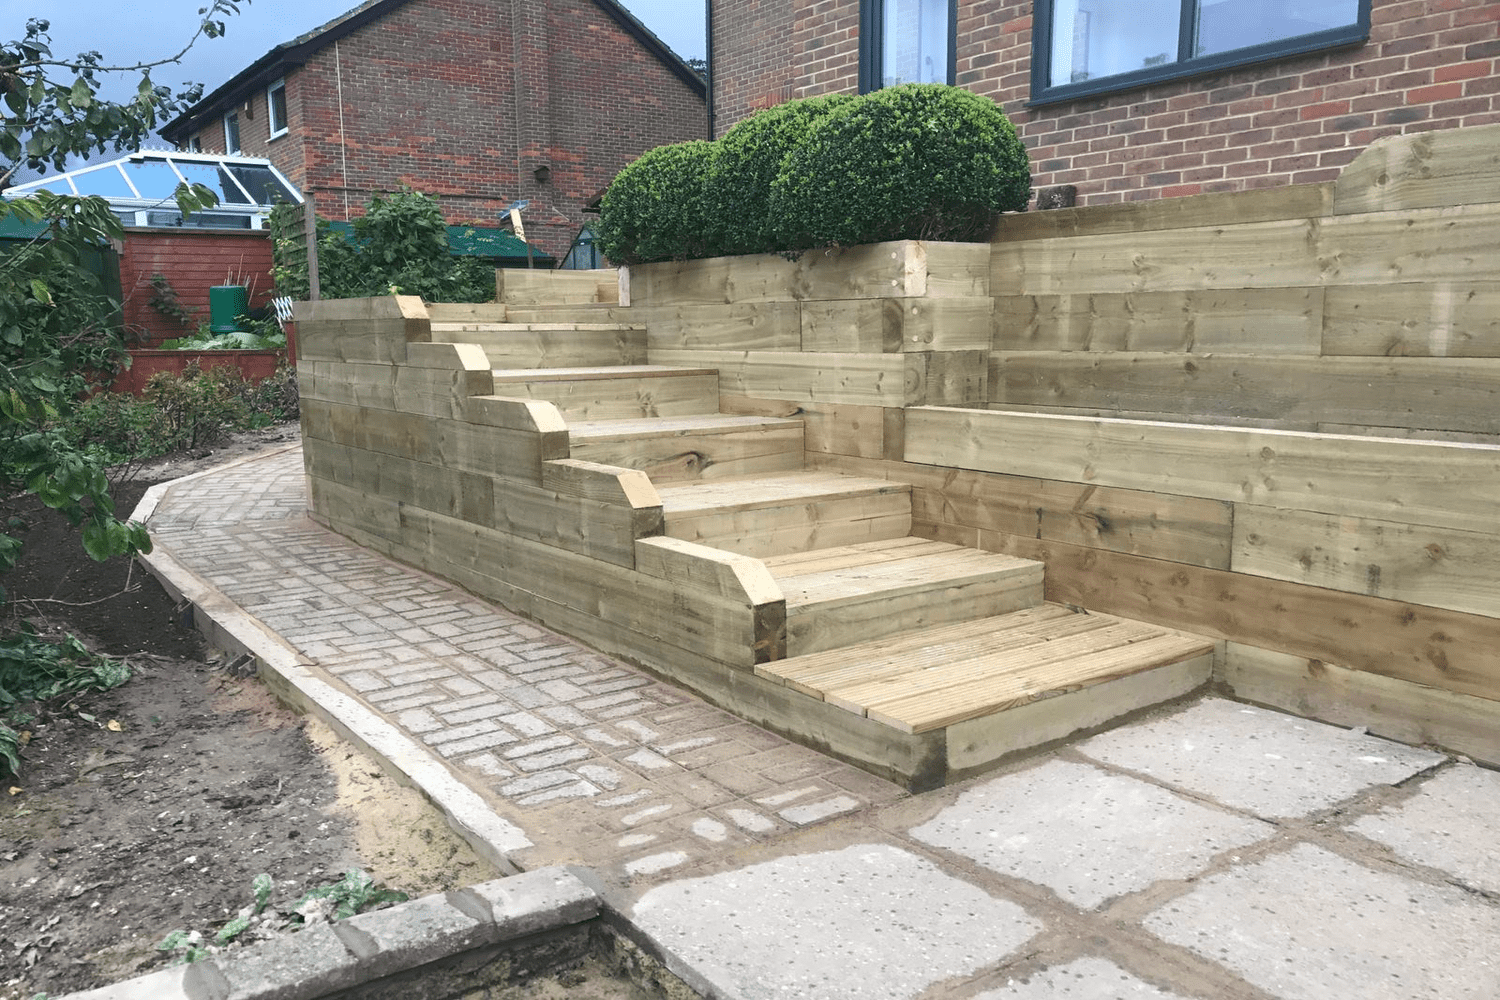 Timber steps with sleeper retaining walls